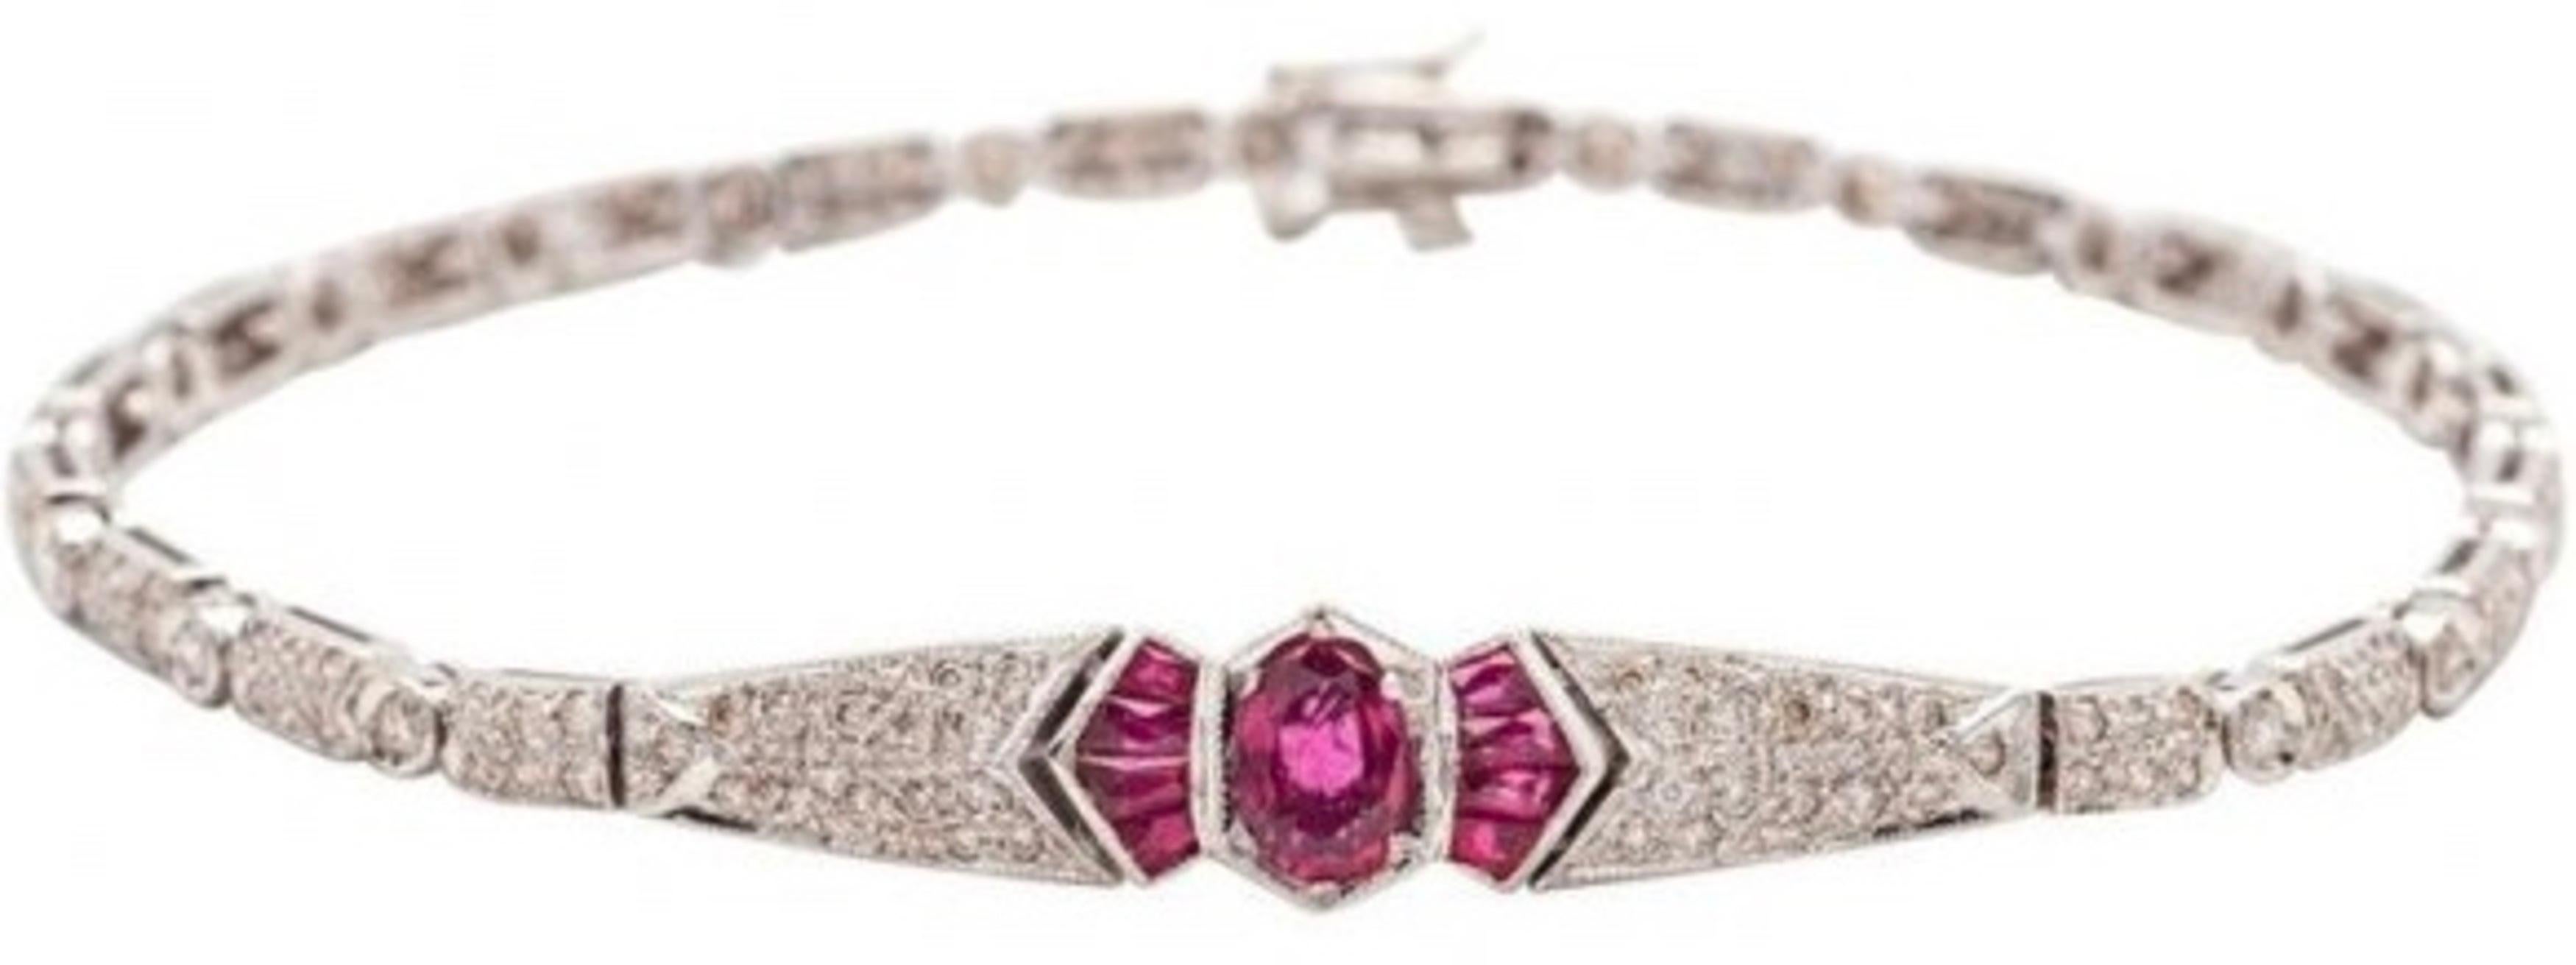 White Gold, Diamond and Ruby Bracelet, 18KT. 
Composed of rectangular and circular links, all set with circular cut diamonds, centered by an oval cut ruby weighting approximately 0.60ct., flanked by eight baguette rubies and completed by two diamond